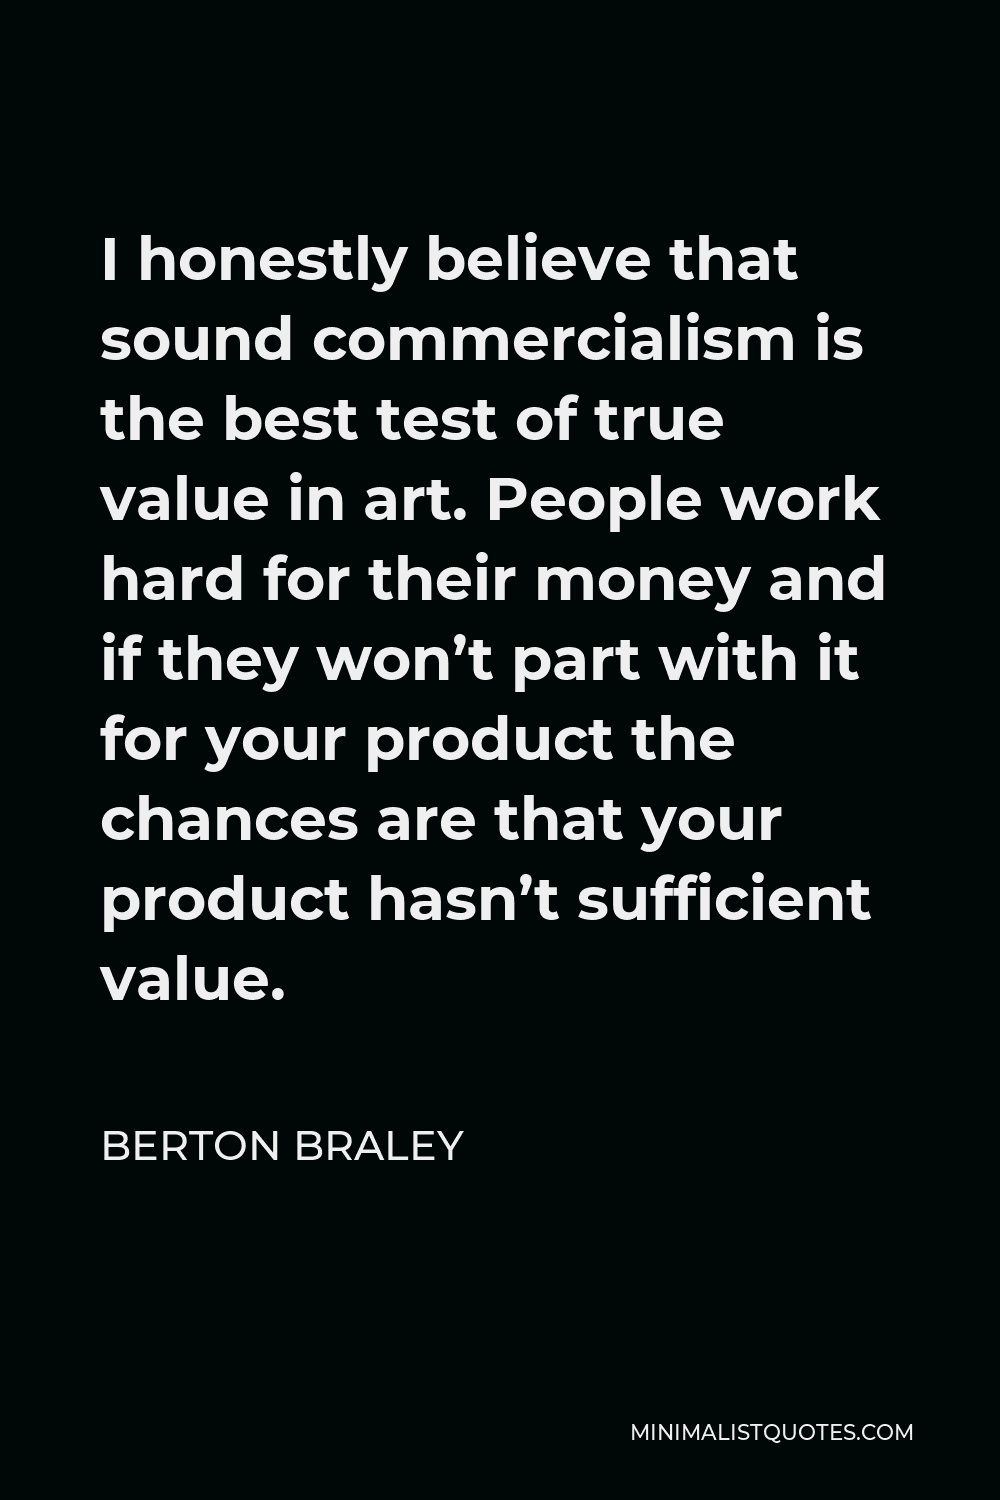 Berton Braley Quote - I honestly believe that sound commercialism is the best test of true value in art. People work hard for their money and if they won’t part with it for your product the chances are that your product hasn’t sufficient value.